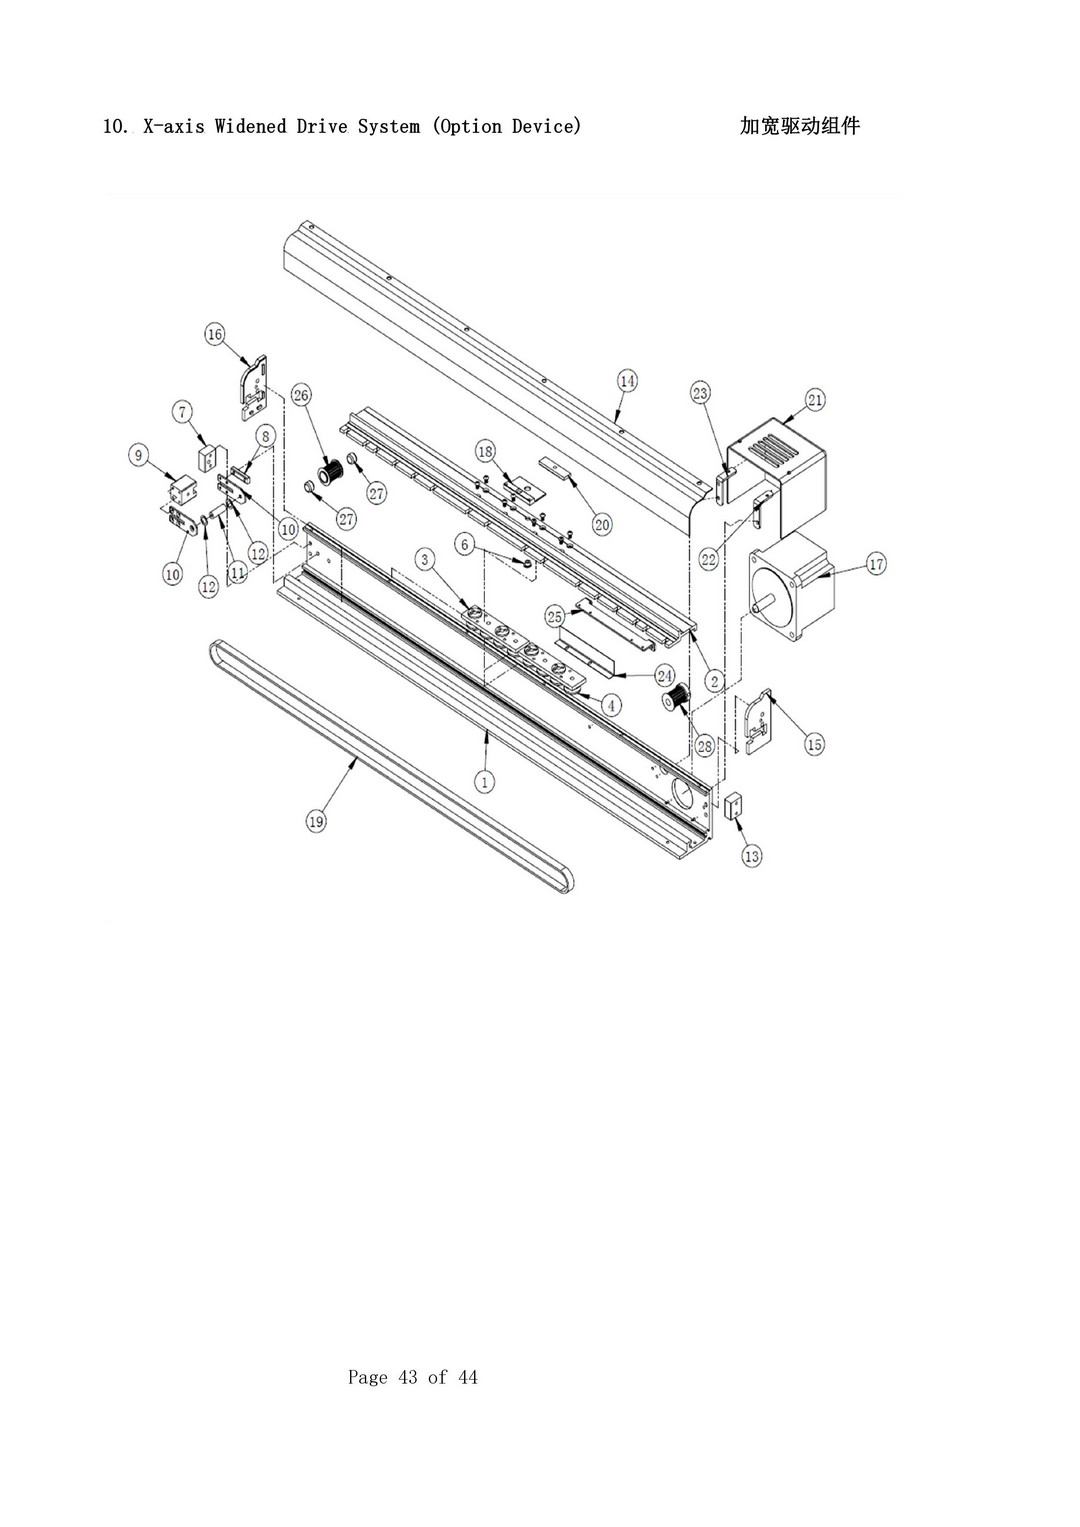 10 X-axis Widened System (Option Device)